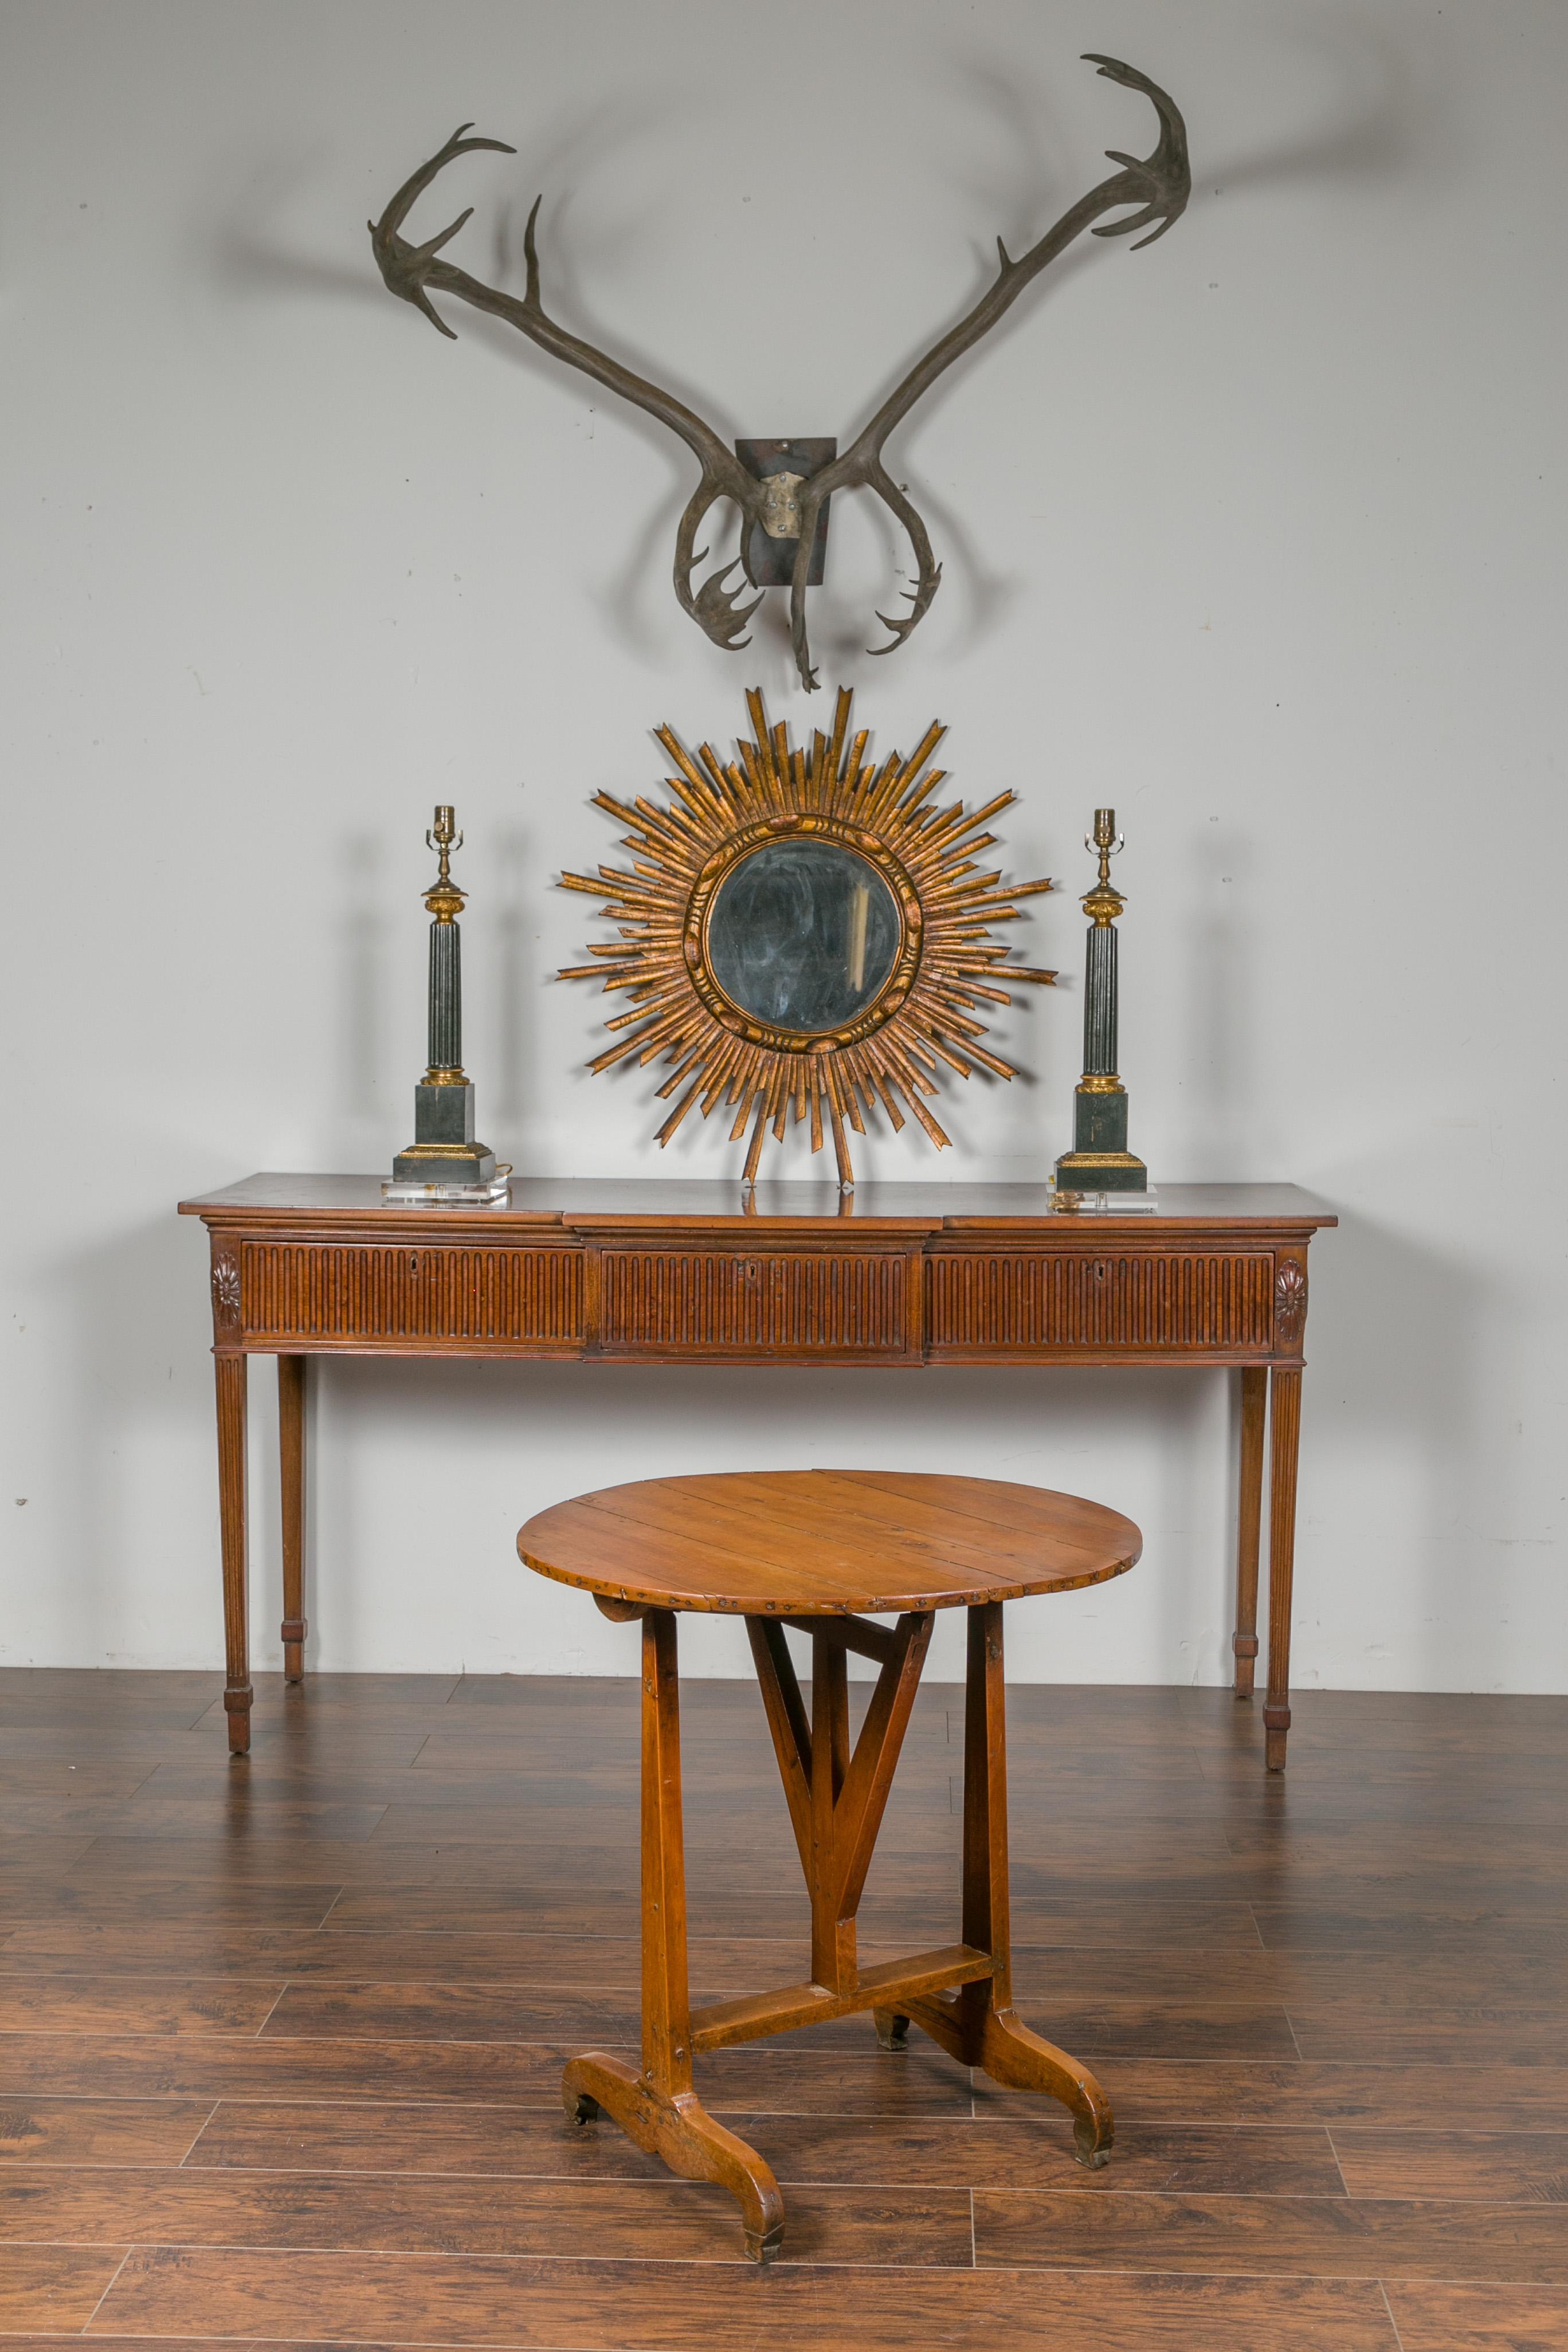 A French walnut wine tasting table from the early 20th century with circular top, trestle base and butterfly wedge. Born in France during the turn of the century, this walnut wine tasting table features a round planked tilt-top, sitting above a